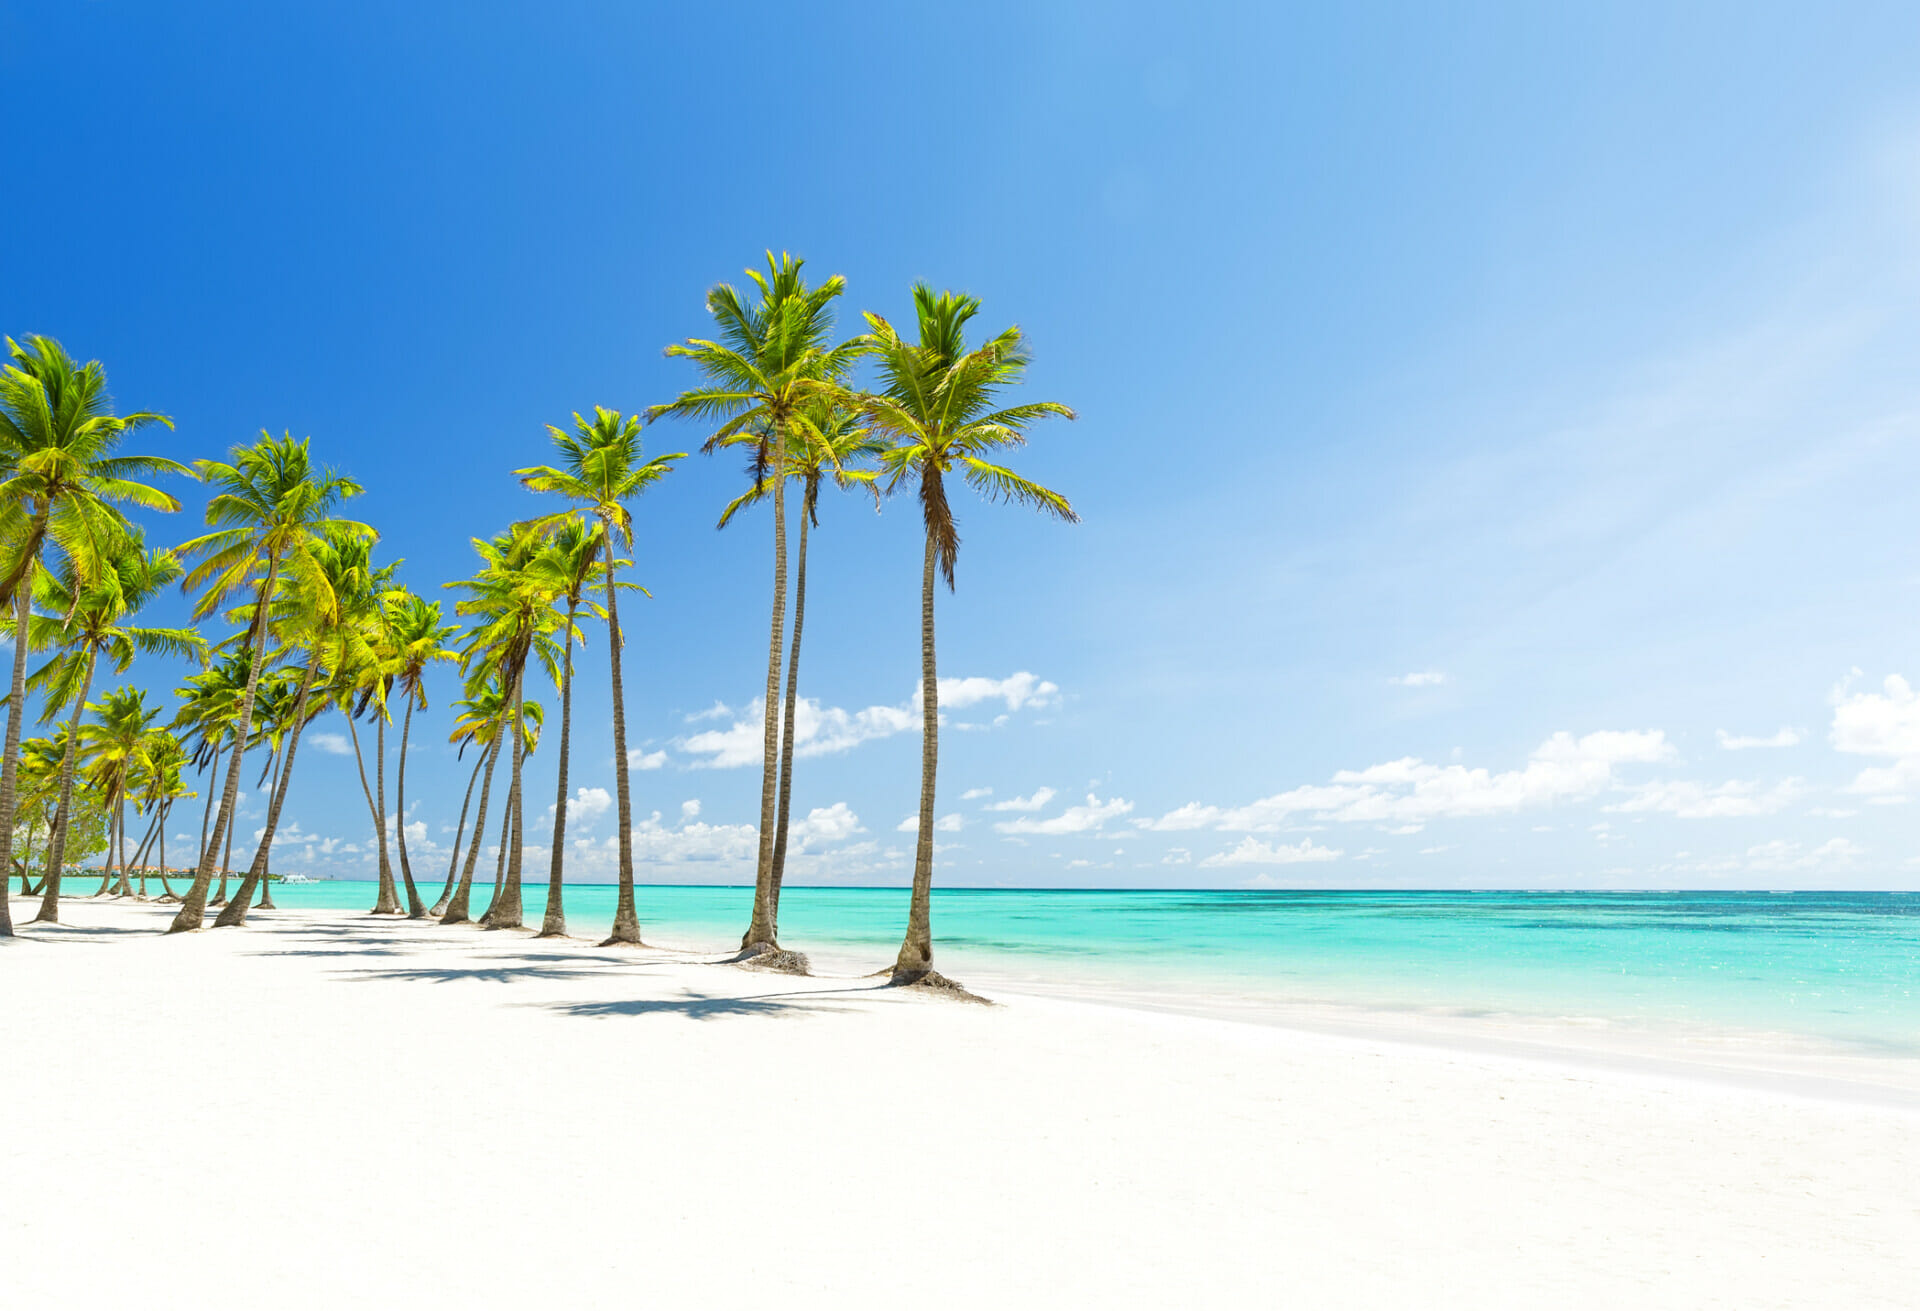 Juanillo Beach in the Dominican Republic with white sand , blue sea, and palm trees.